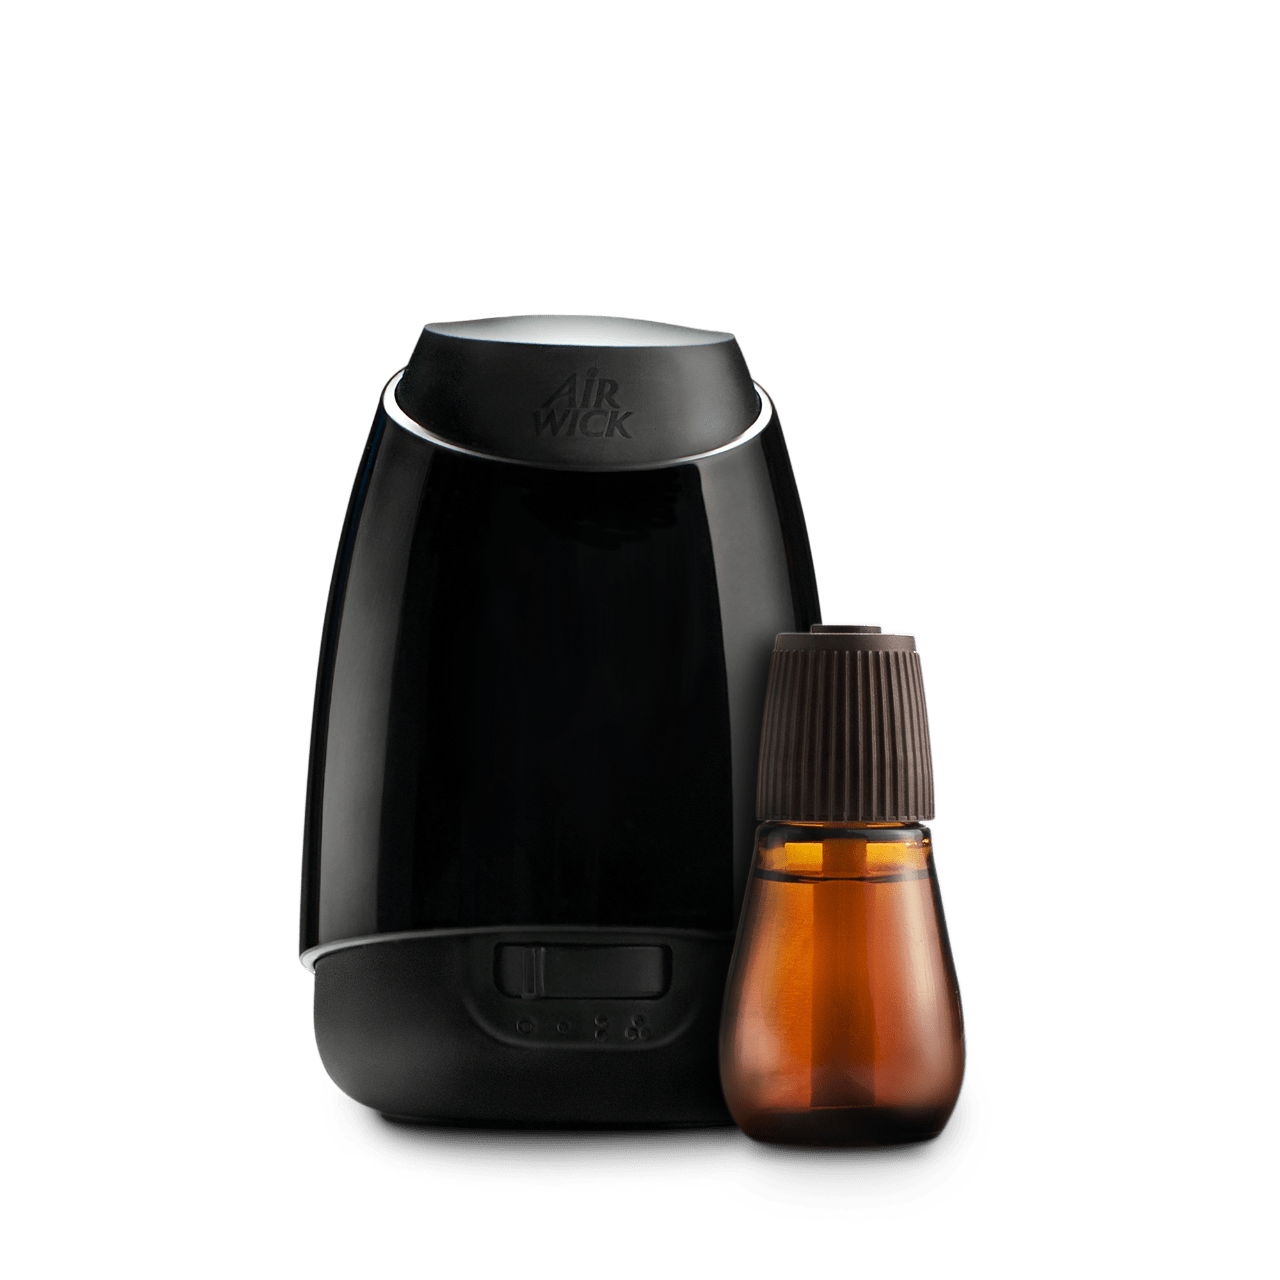 https://www.airwick.co.uk/content/dam/commerce/airwick/uk/en_gb/optimized/essential-mist-diffuser-device-and-refill.png